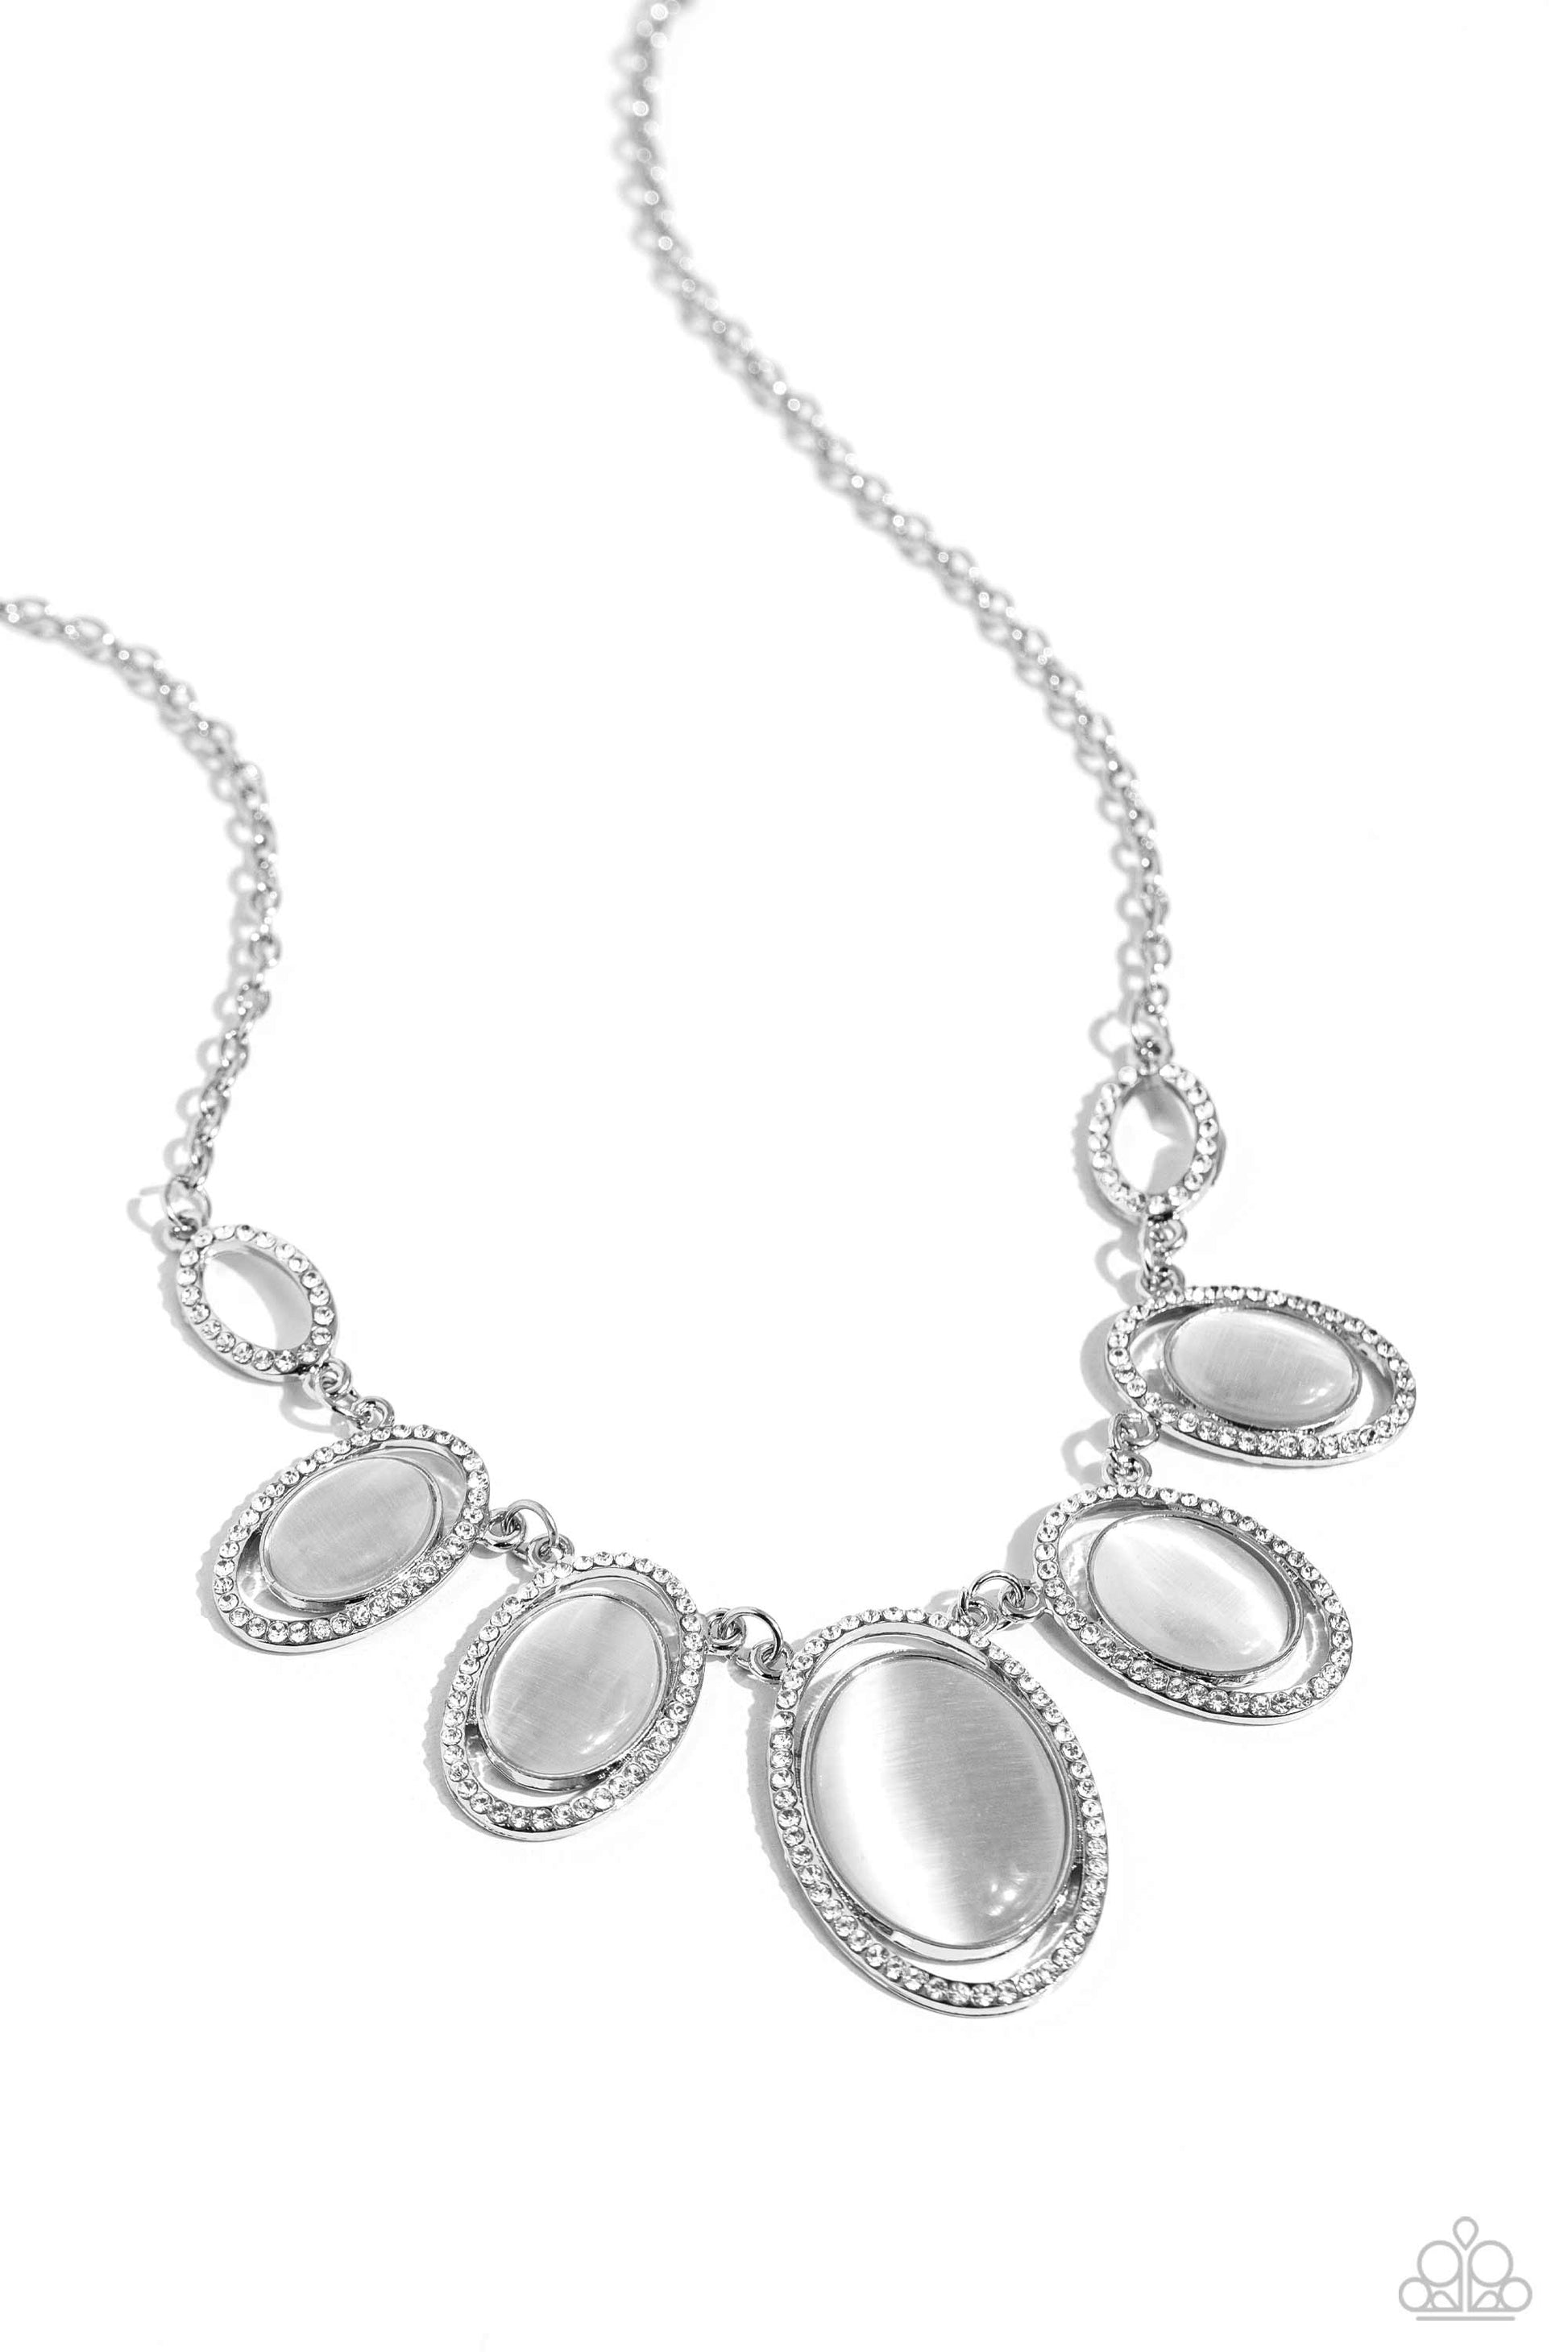 A BEAM Come True White Cat's Eye Stone Necklace - Paparazzi Accessories  Featuring white rhinestone encrusted oval frames, a mesmerizing collection of glowing white cat's eye stones delicately link below the collar for an ethereal pop of color. Features an adjustable clasp closure.  Sold as one individual necklace. Includes one pair of matching earrings.  P2RE-WTXX-650XX